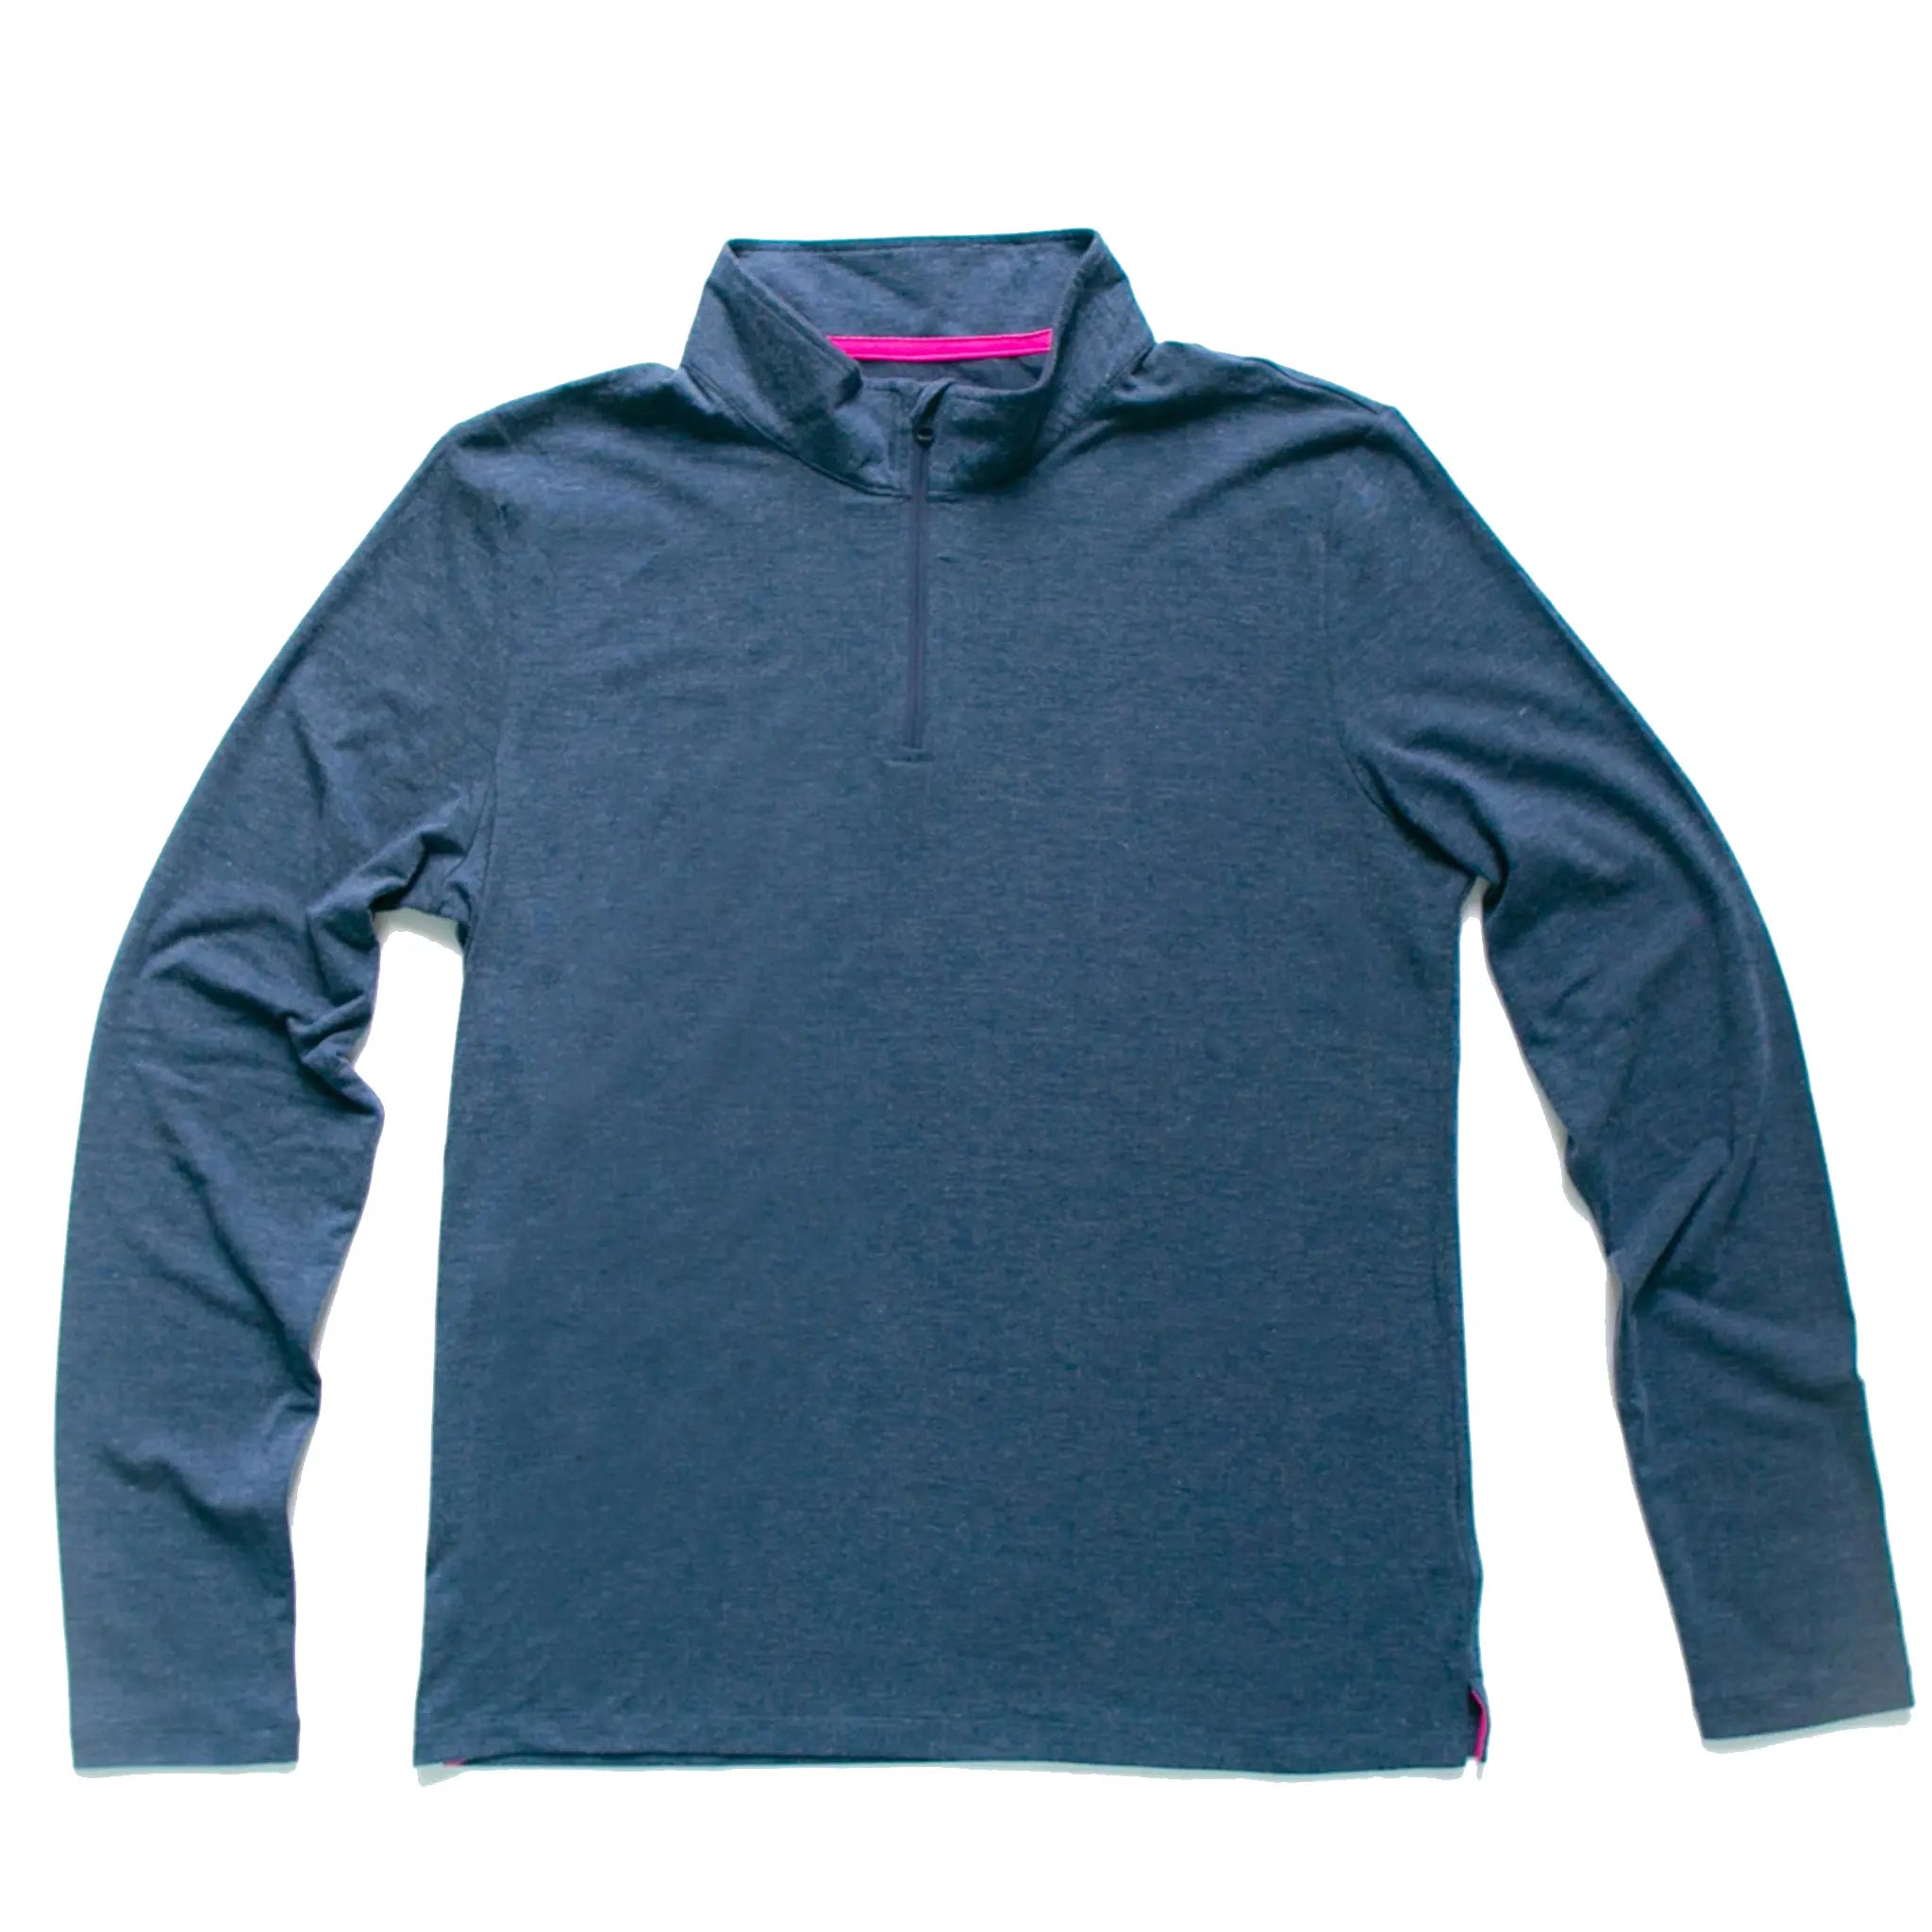 UPF 50+ Long-Sleeve Collared Top